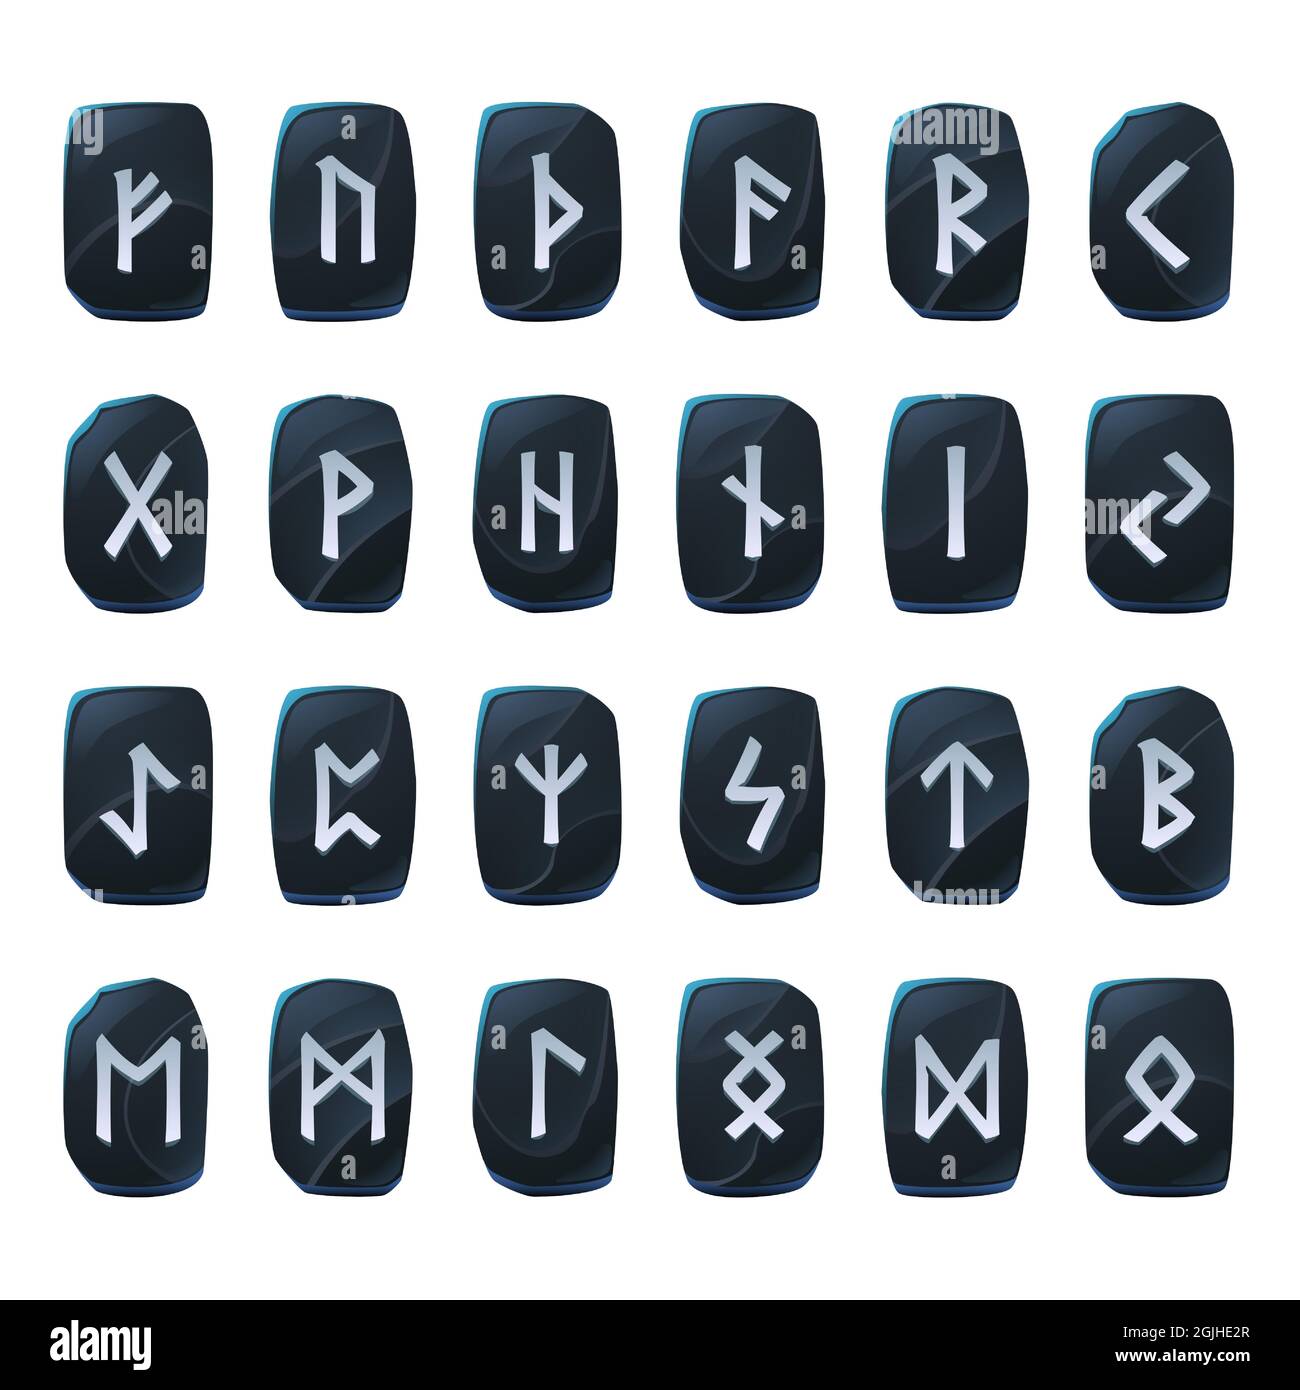 Set of onyx game runes, nordic ancient alphabet, viking celtic futark symbols engraved on black stone pieces. Esoteric occult signs, mystic ui or gui elements, isolated cartoon vector illustration Stock Vector